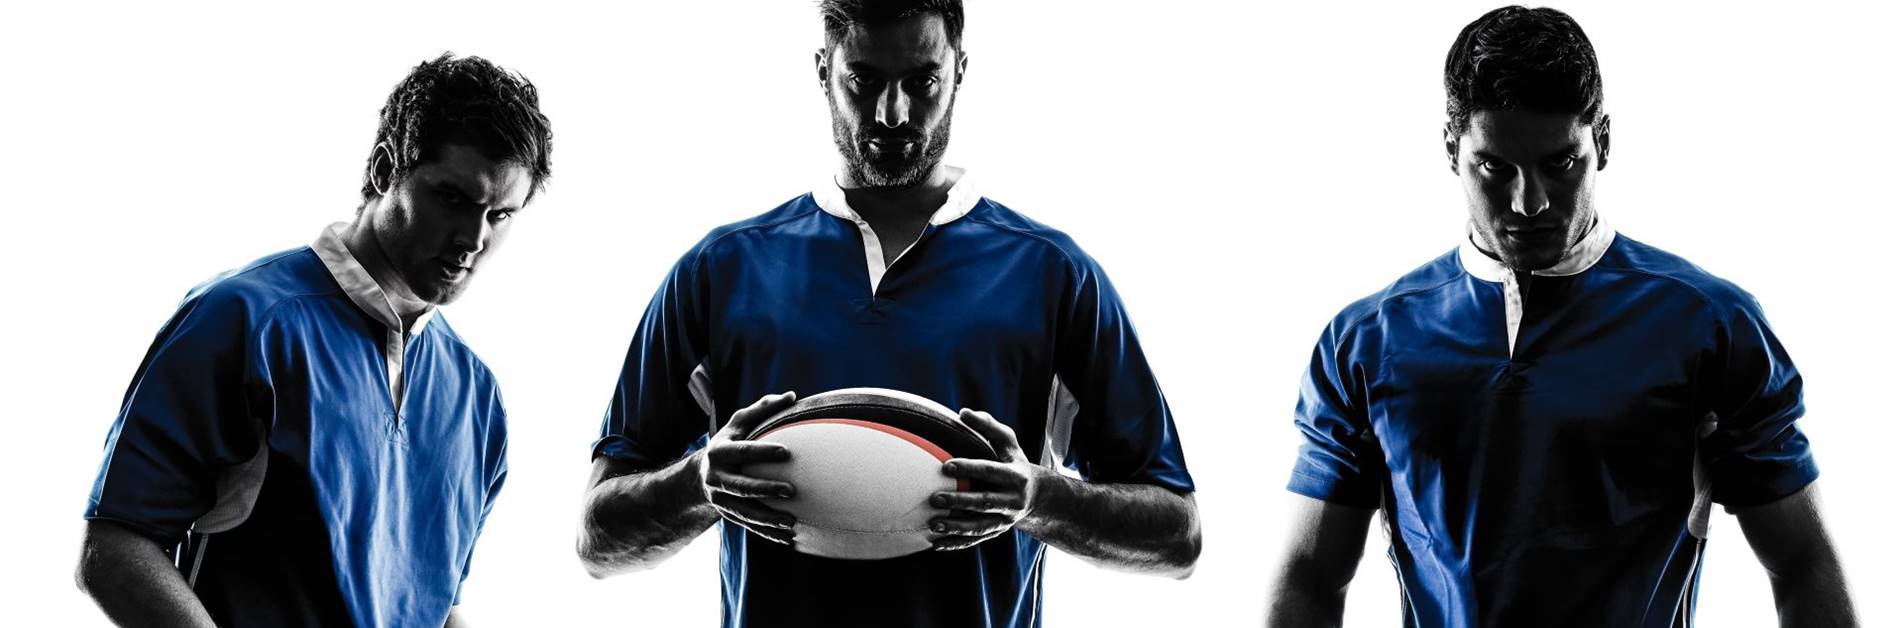 6 Nations Rugby Packages in Rome